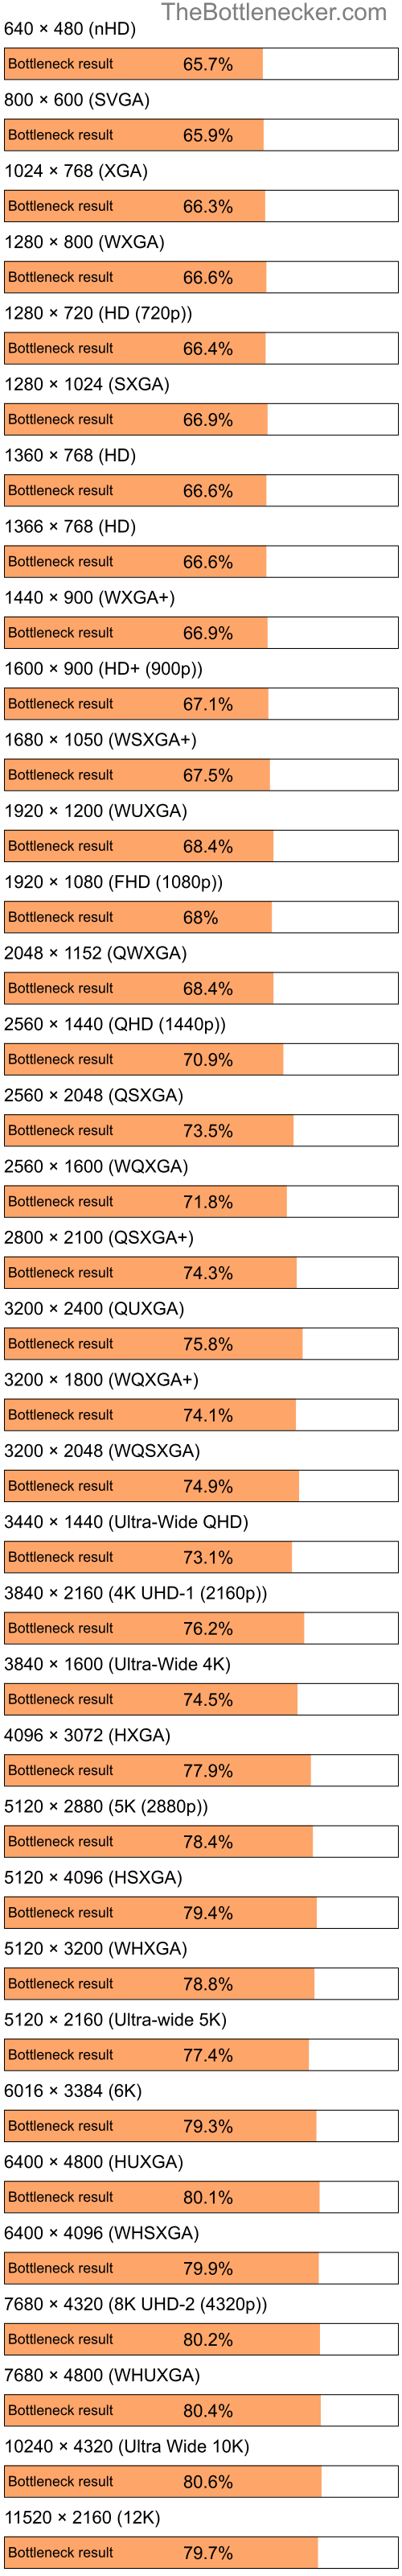 Bottleneck results by resolution for Intel Pentium 4 and NVIDIA Quadro NVS 295 in General Tasks